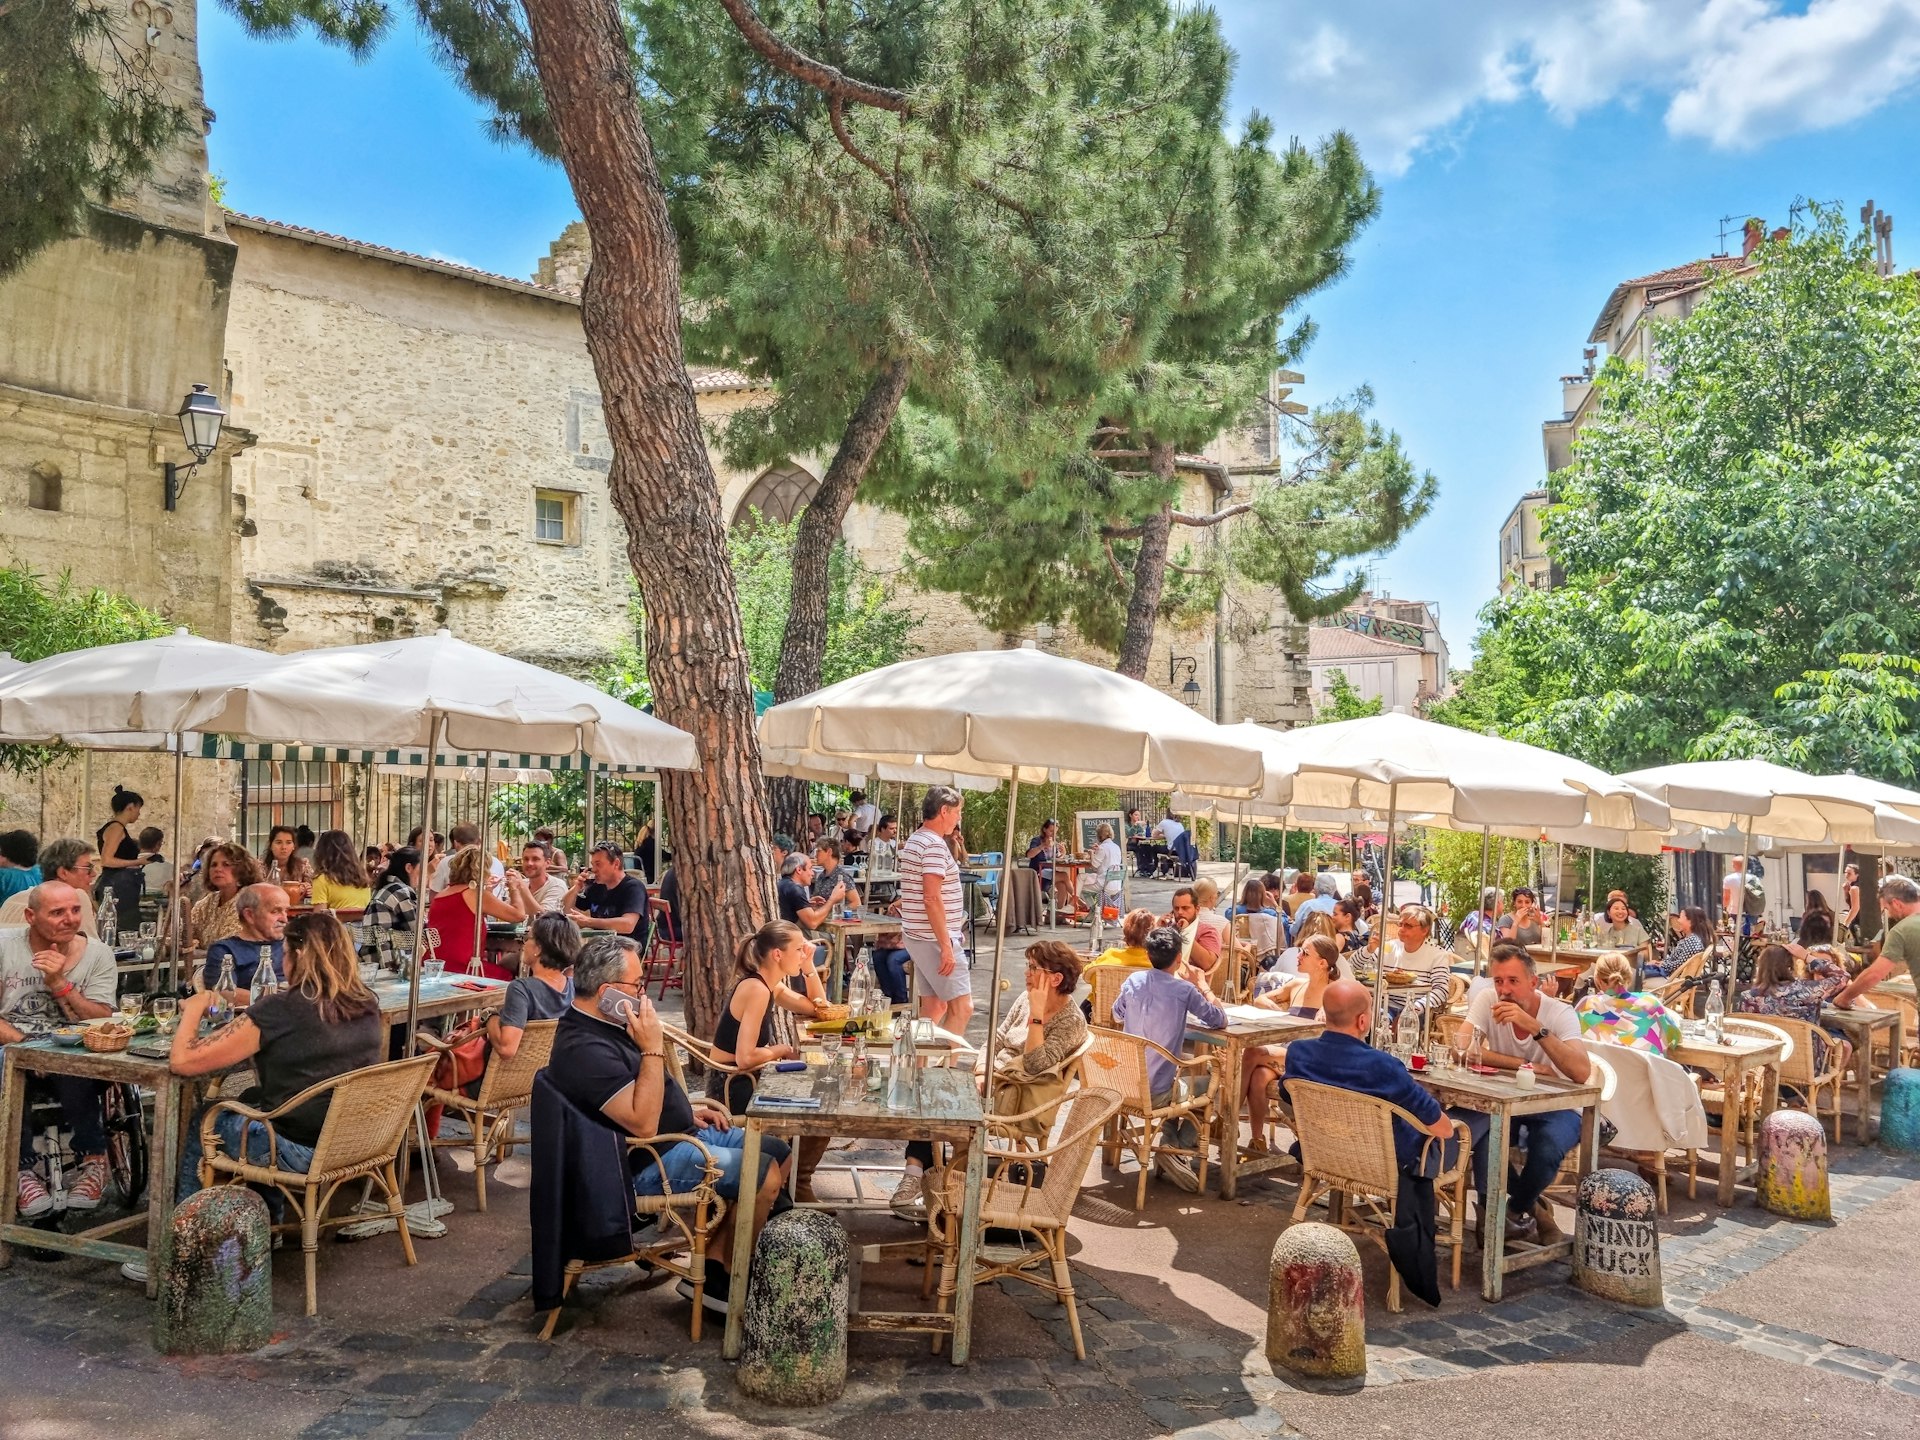 People sit at outdoors tables shaded by trees in a city square